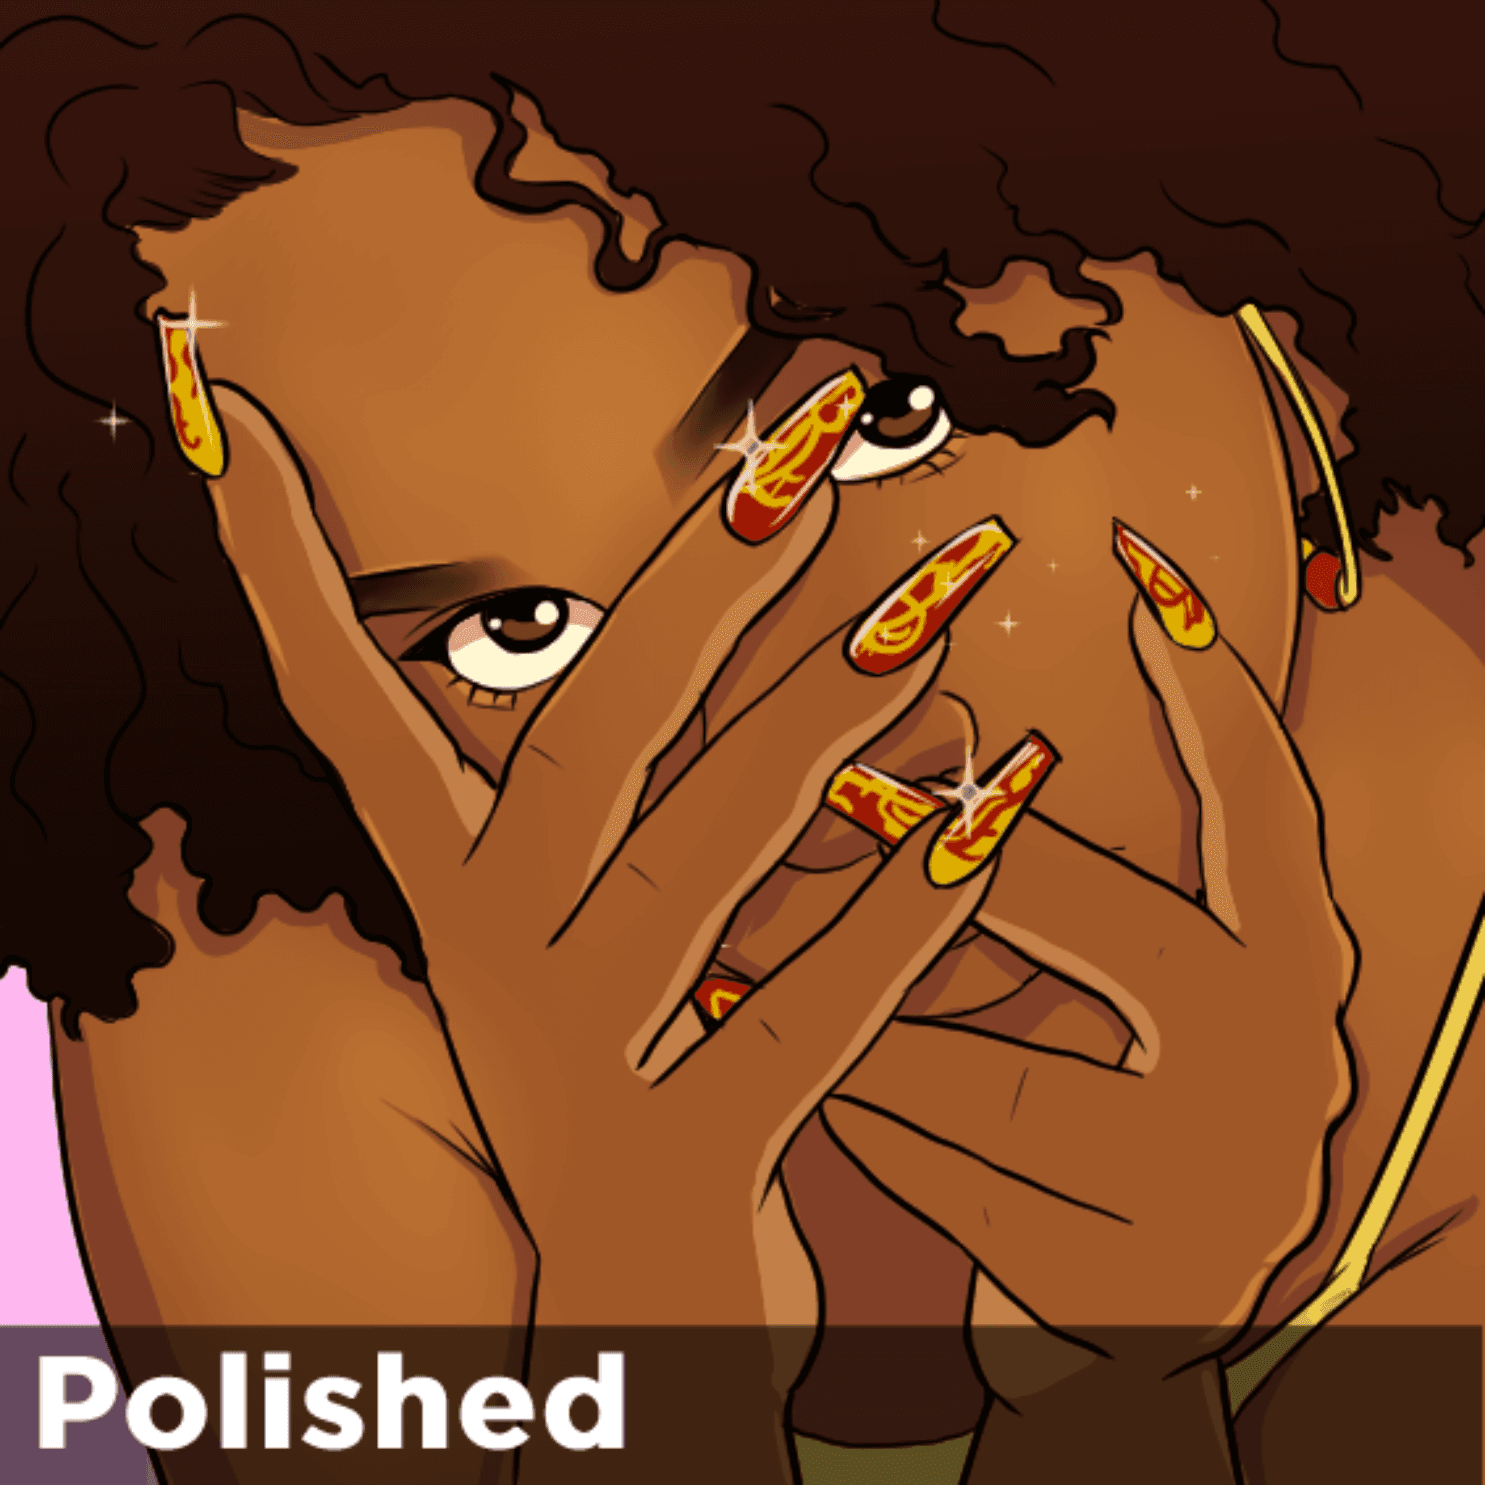 Thumbnail for "Polished: Why We Care About Our Nails".